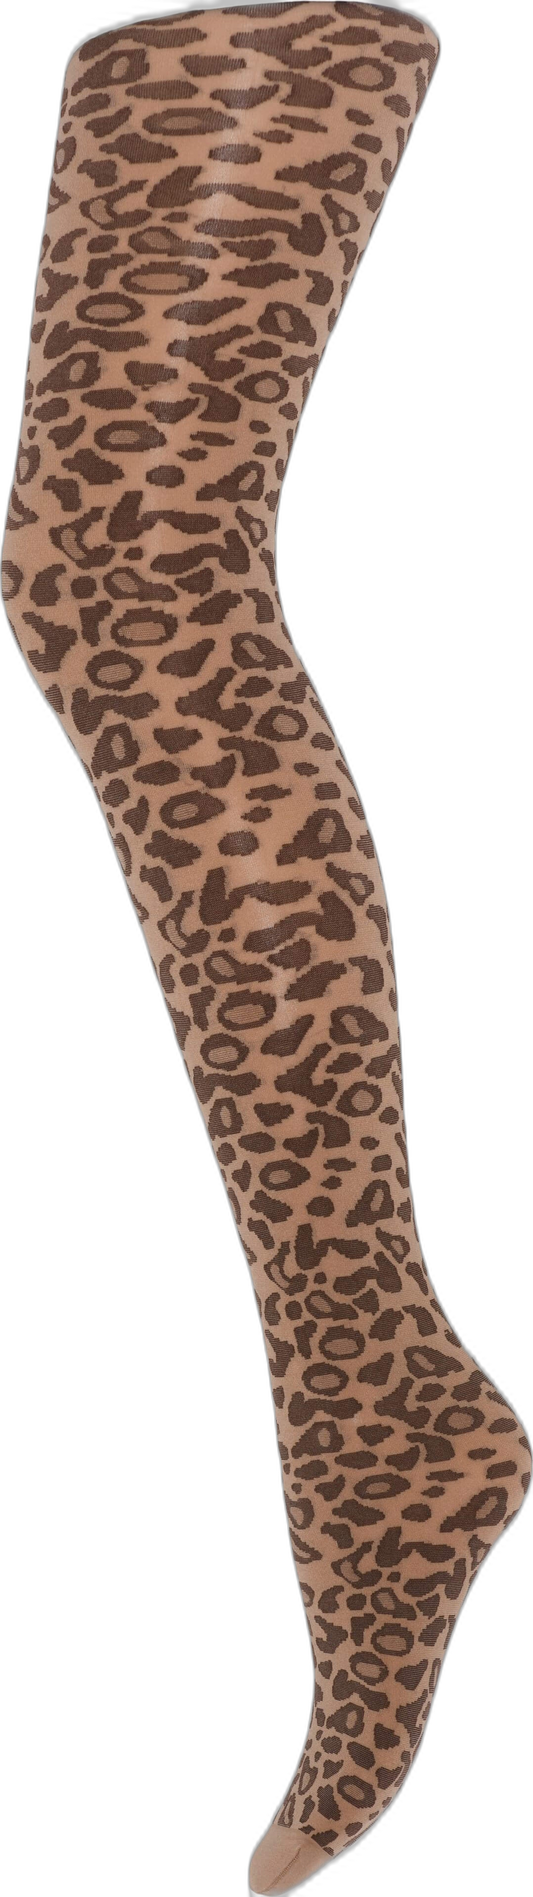 Tights i Leopard. fra HYPE THE DETAIL